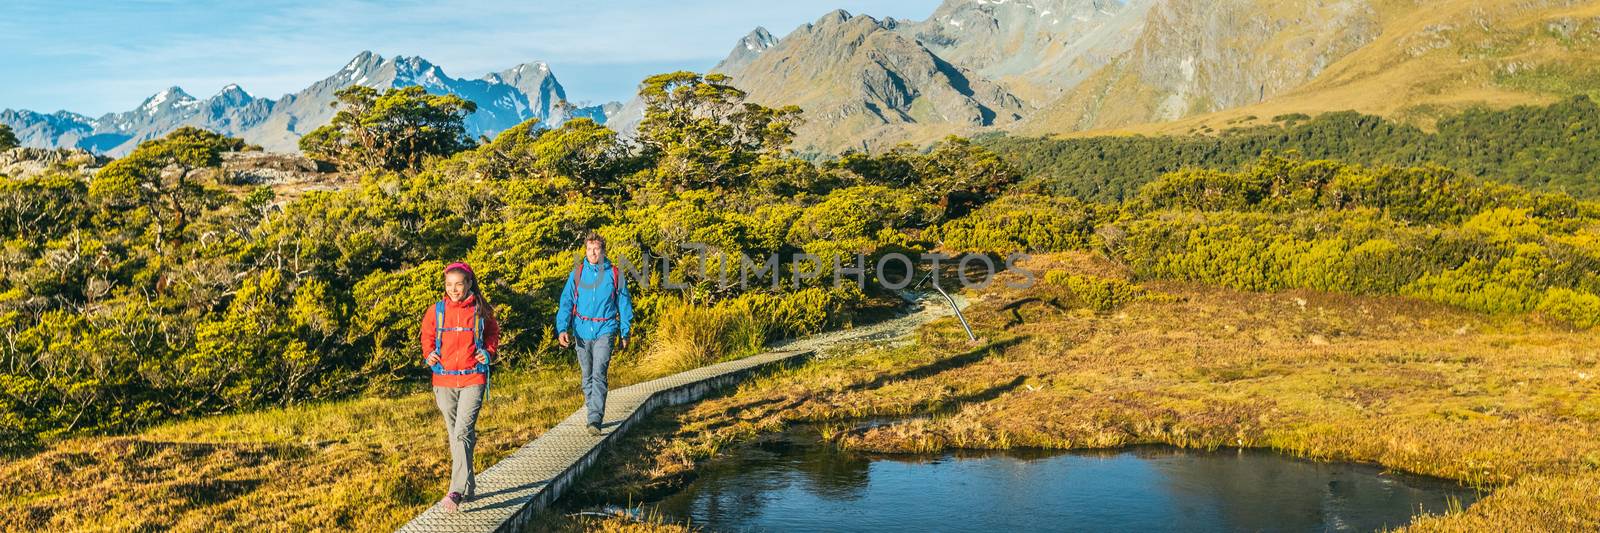 New Zealand Hiking. Panoramic banner of Young hiking couple walking on trail at Routeburn Track during. Hikers carrying backpacks tramping Key Summit Track, Fiordland National Park, New Zealand by Maridav